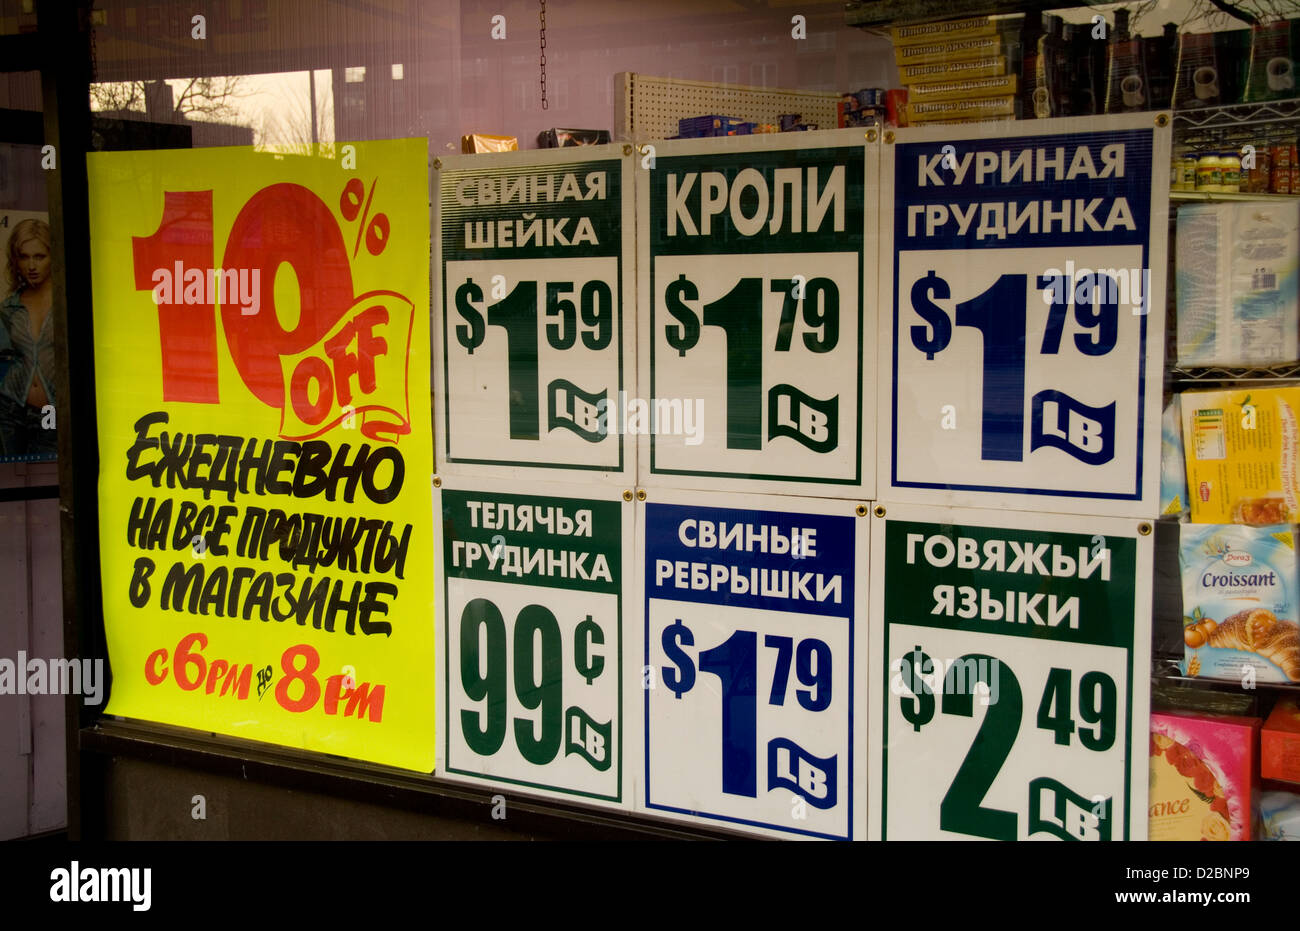 Market With Signs In Russian And English In Brighton Beach, Brooklyn, New York City Stock Photo